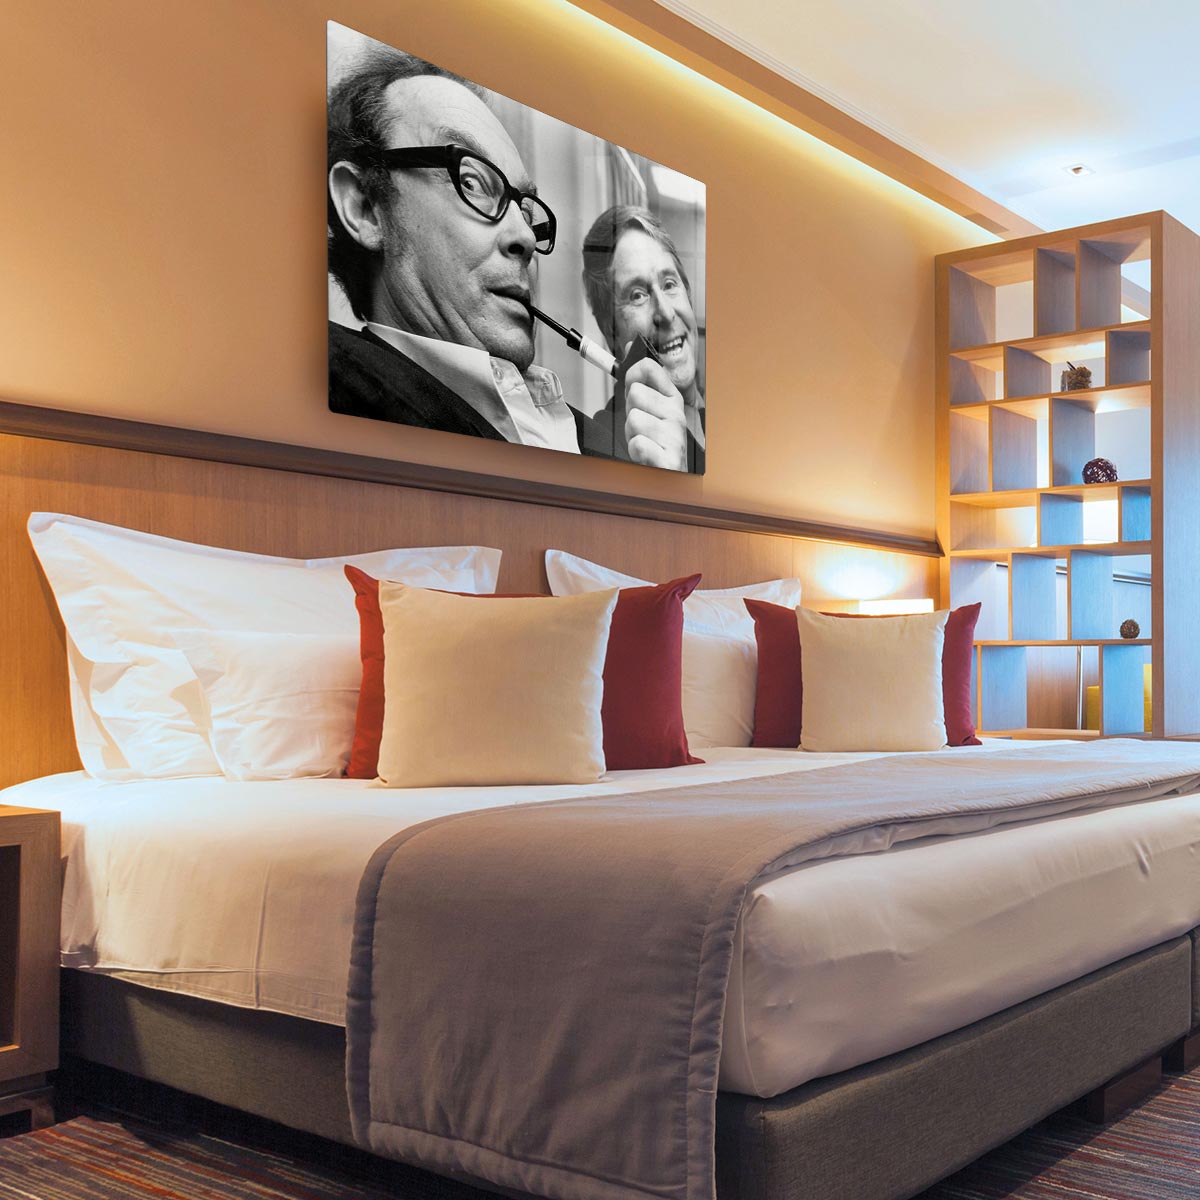 Morecambe and Wise in the 70s HD Metal Print